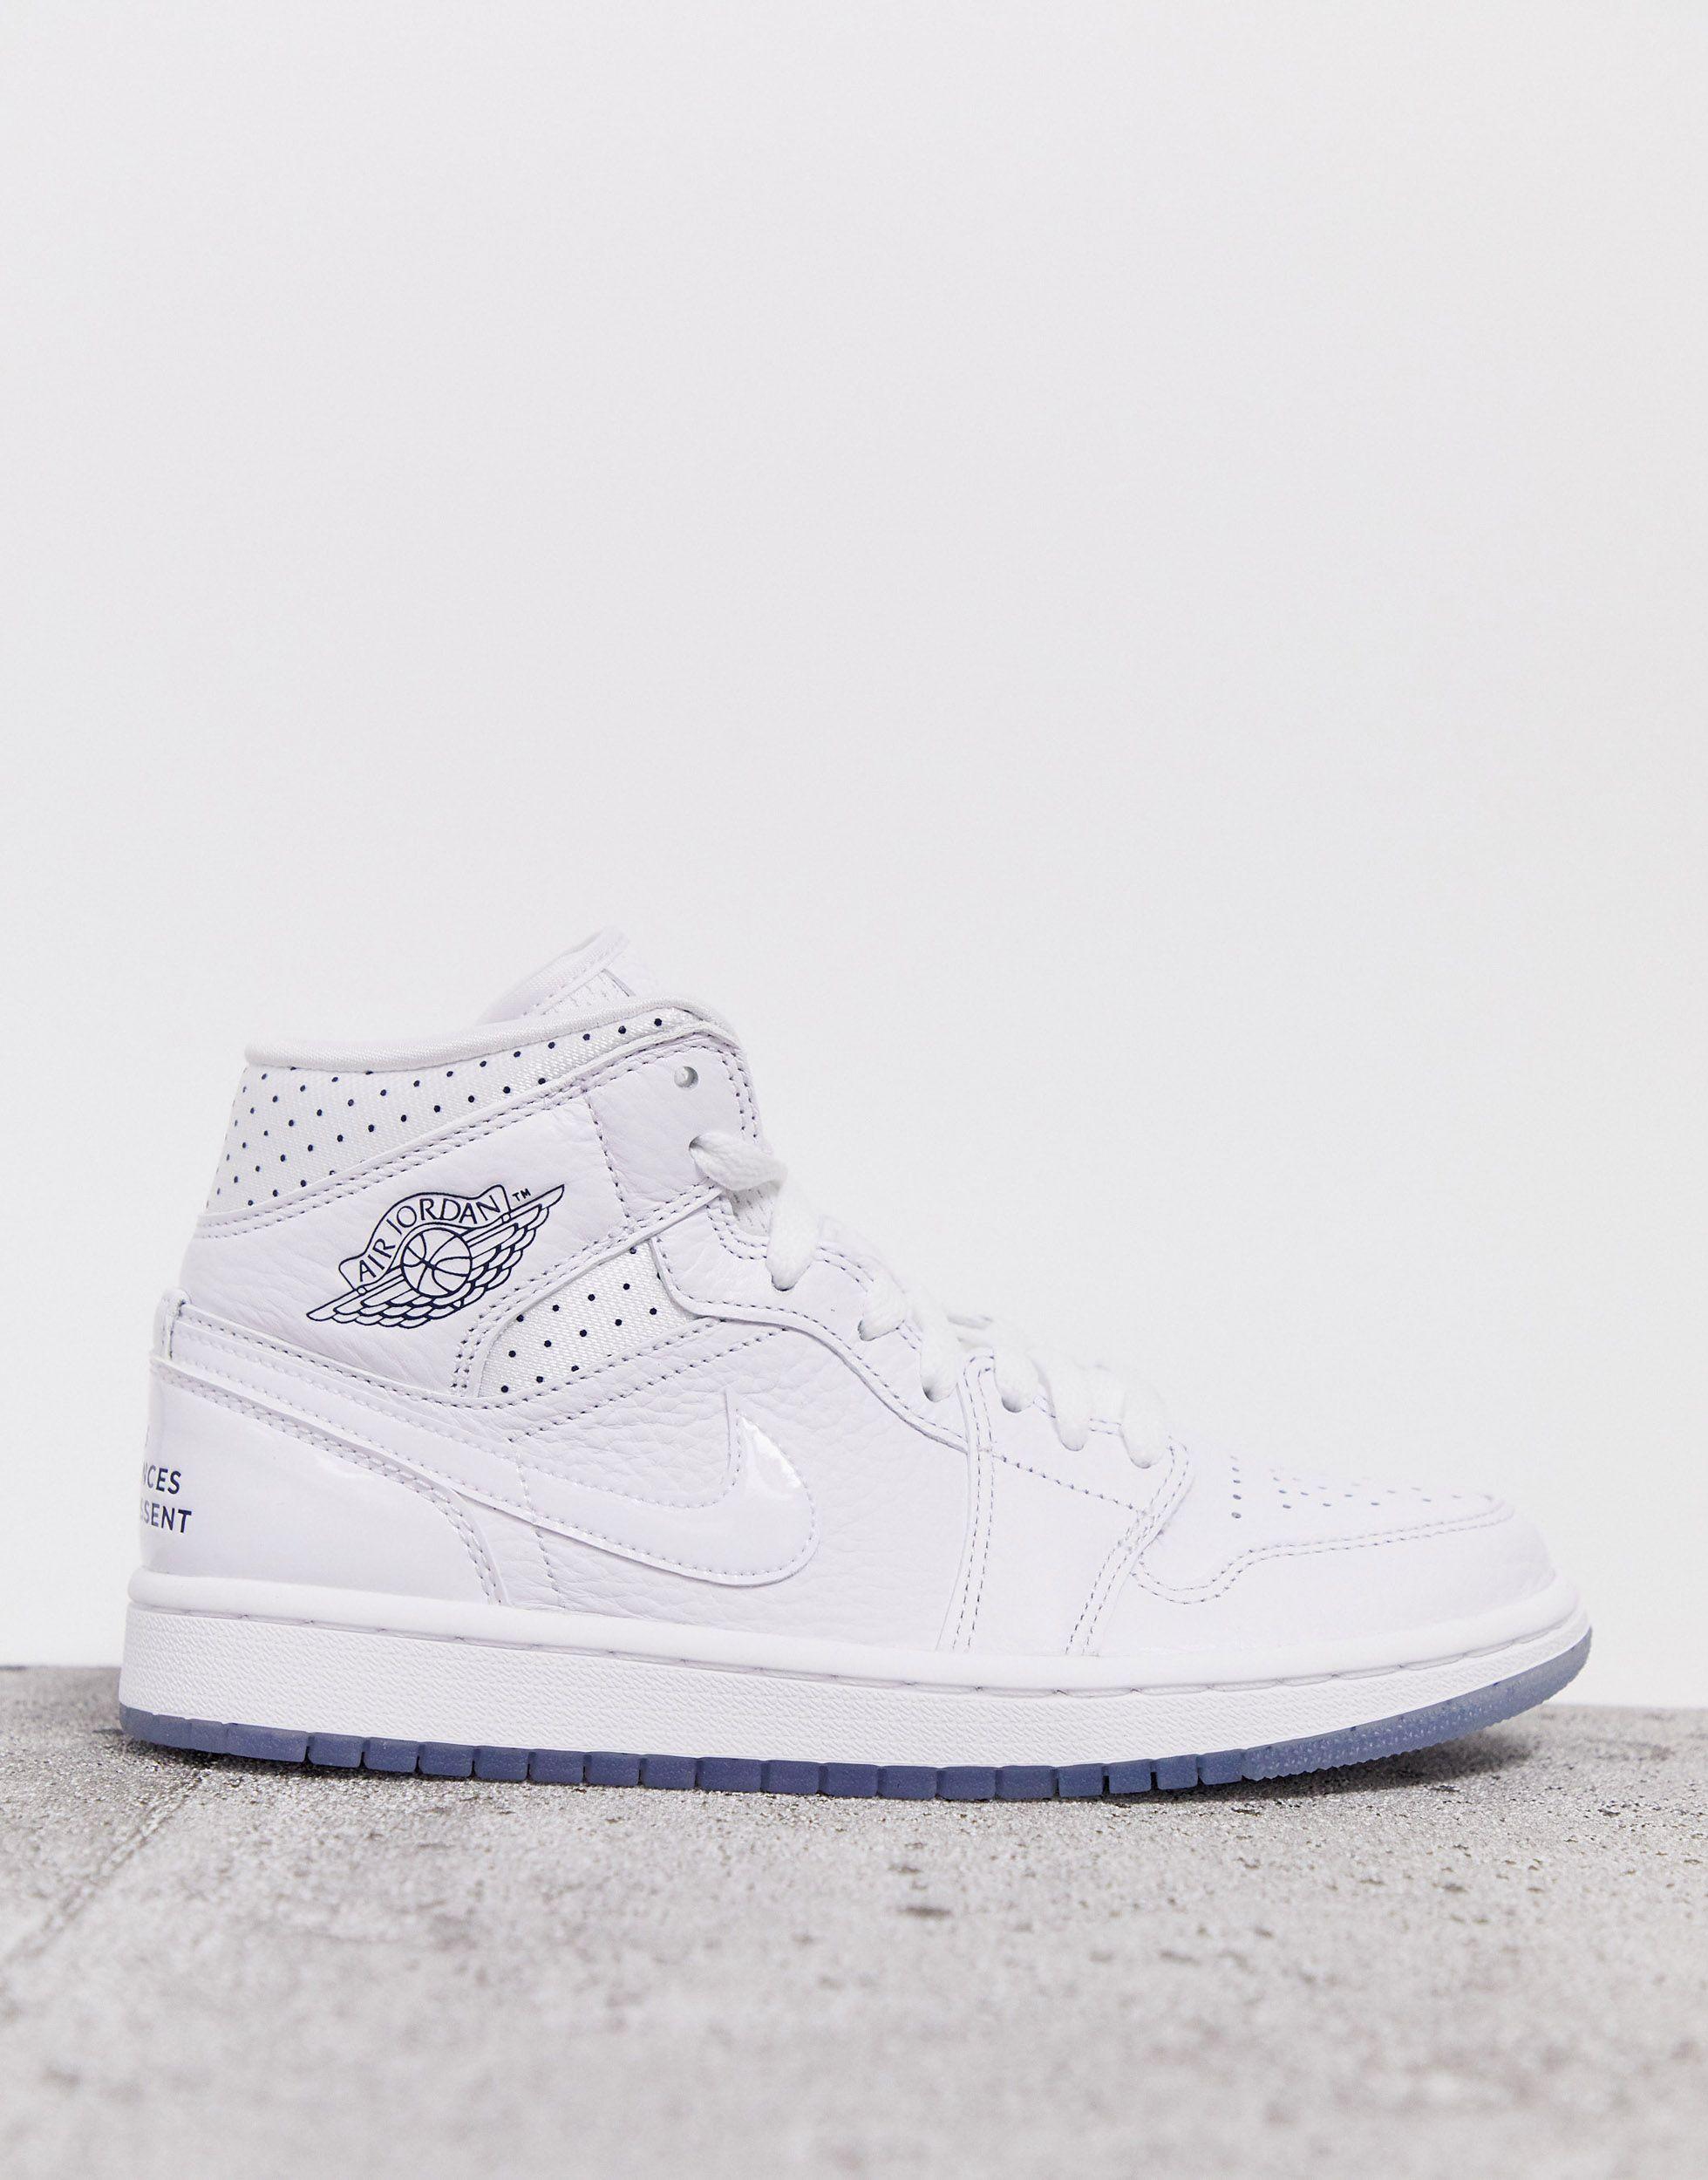 Nike Rubber Air Jordan 1 Mid Womens World Cup Trainers in White - Lyst